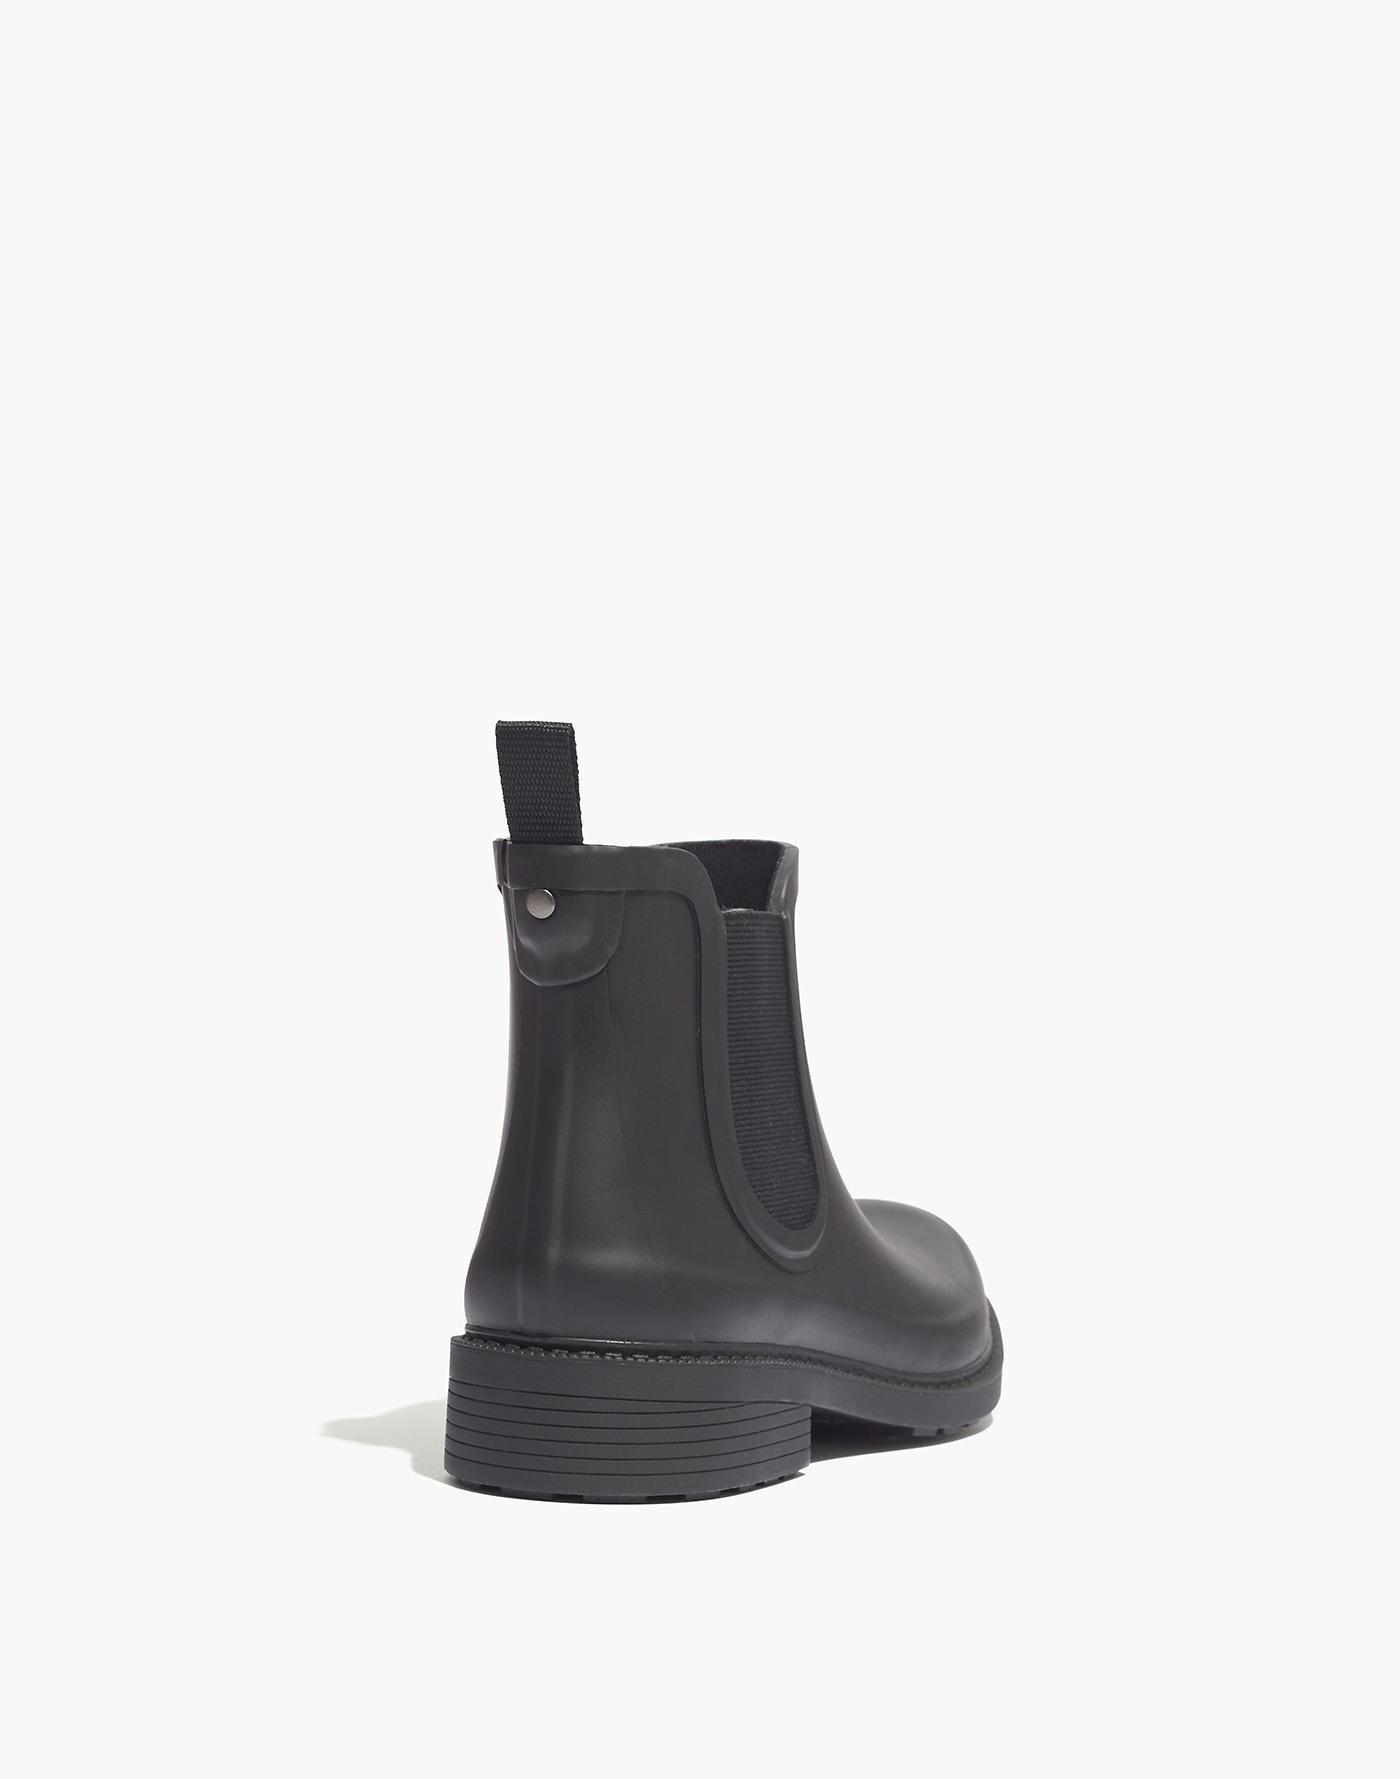 Madewell Cotton The Chelsea Rain Boot in Black - Lyst